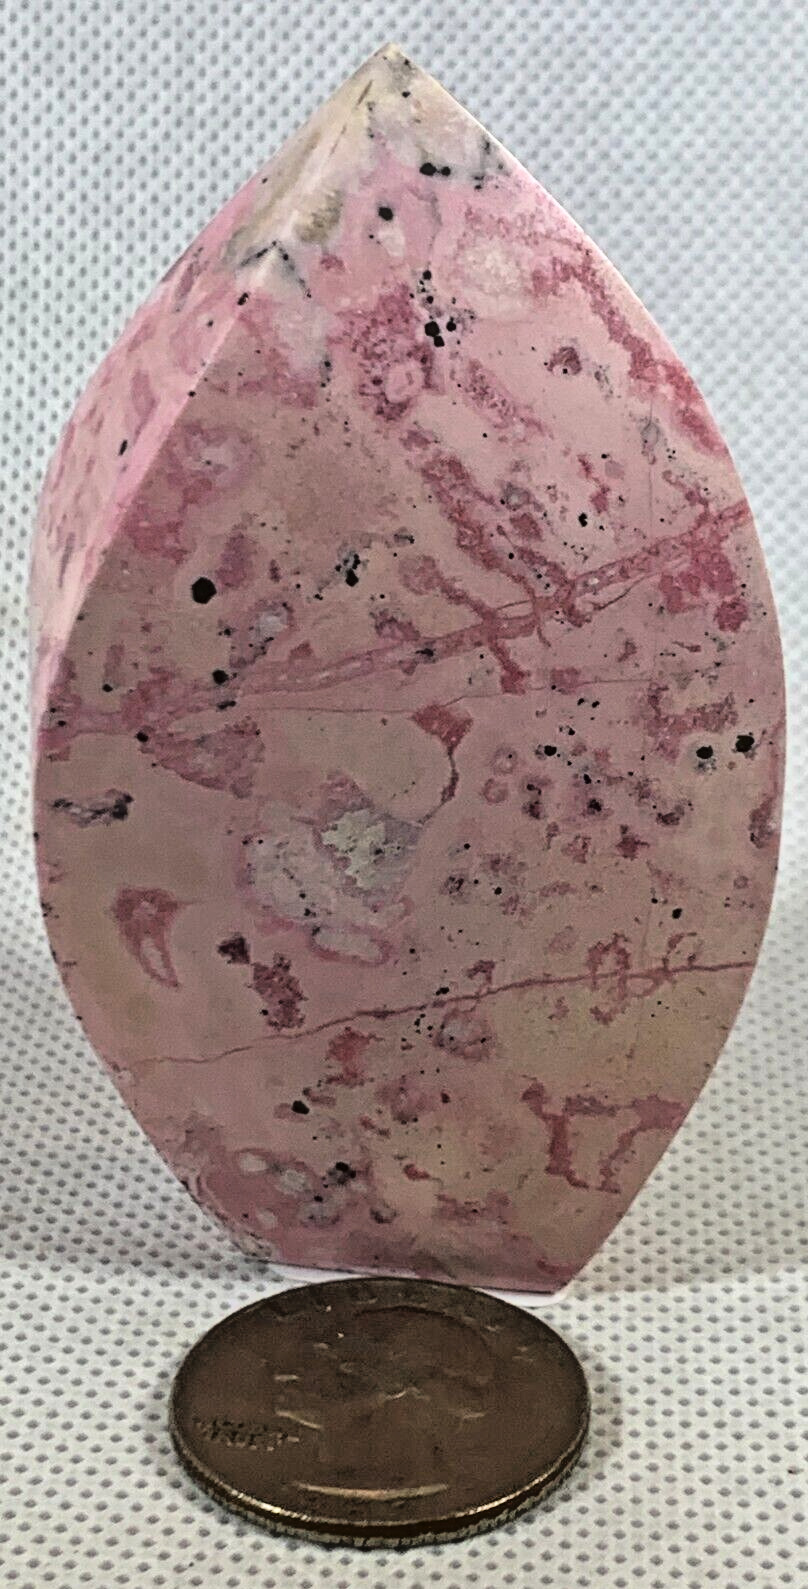 RHODONITE FLAME - PINK SWIRLING LIGHT AND DARK COLORING -PERFECT POINT